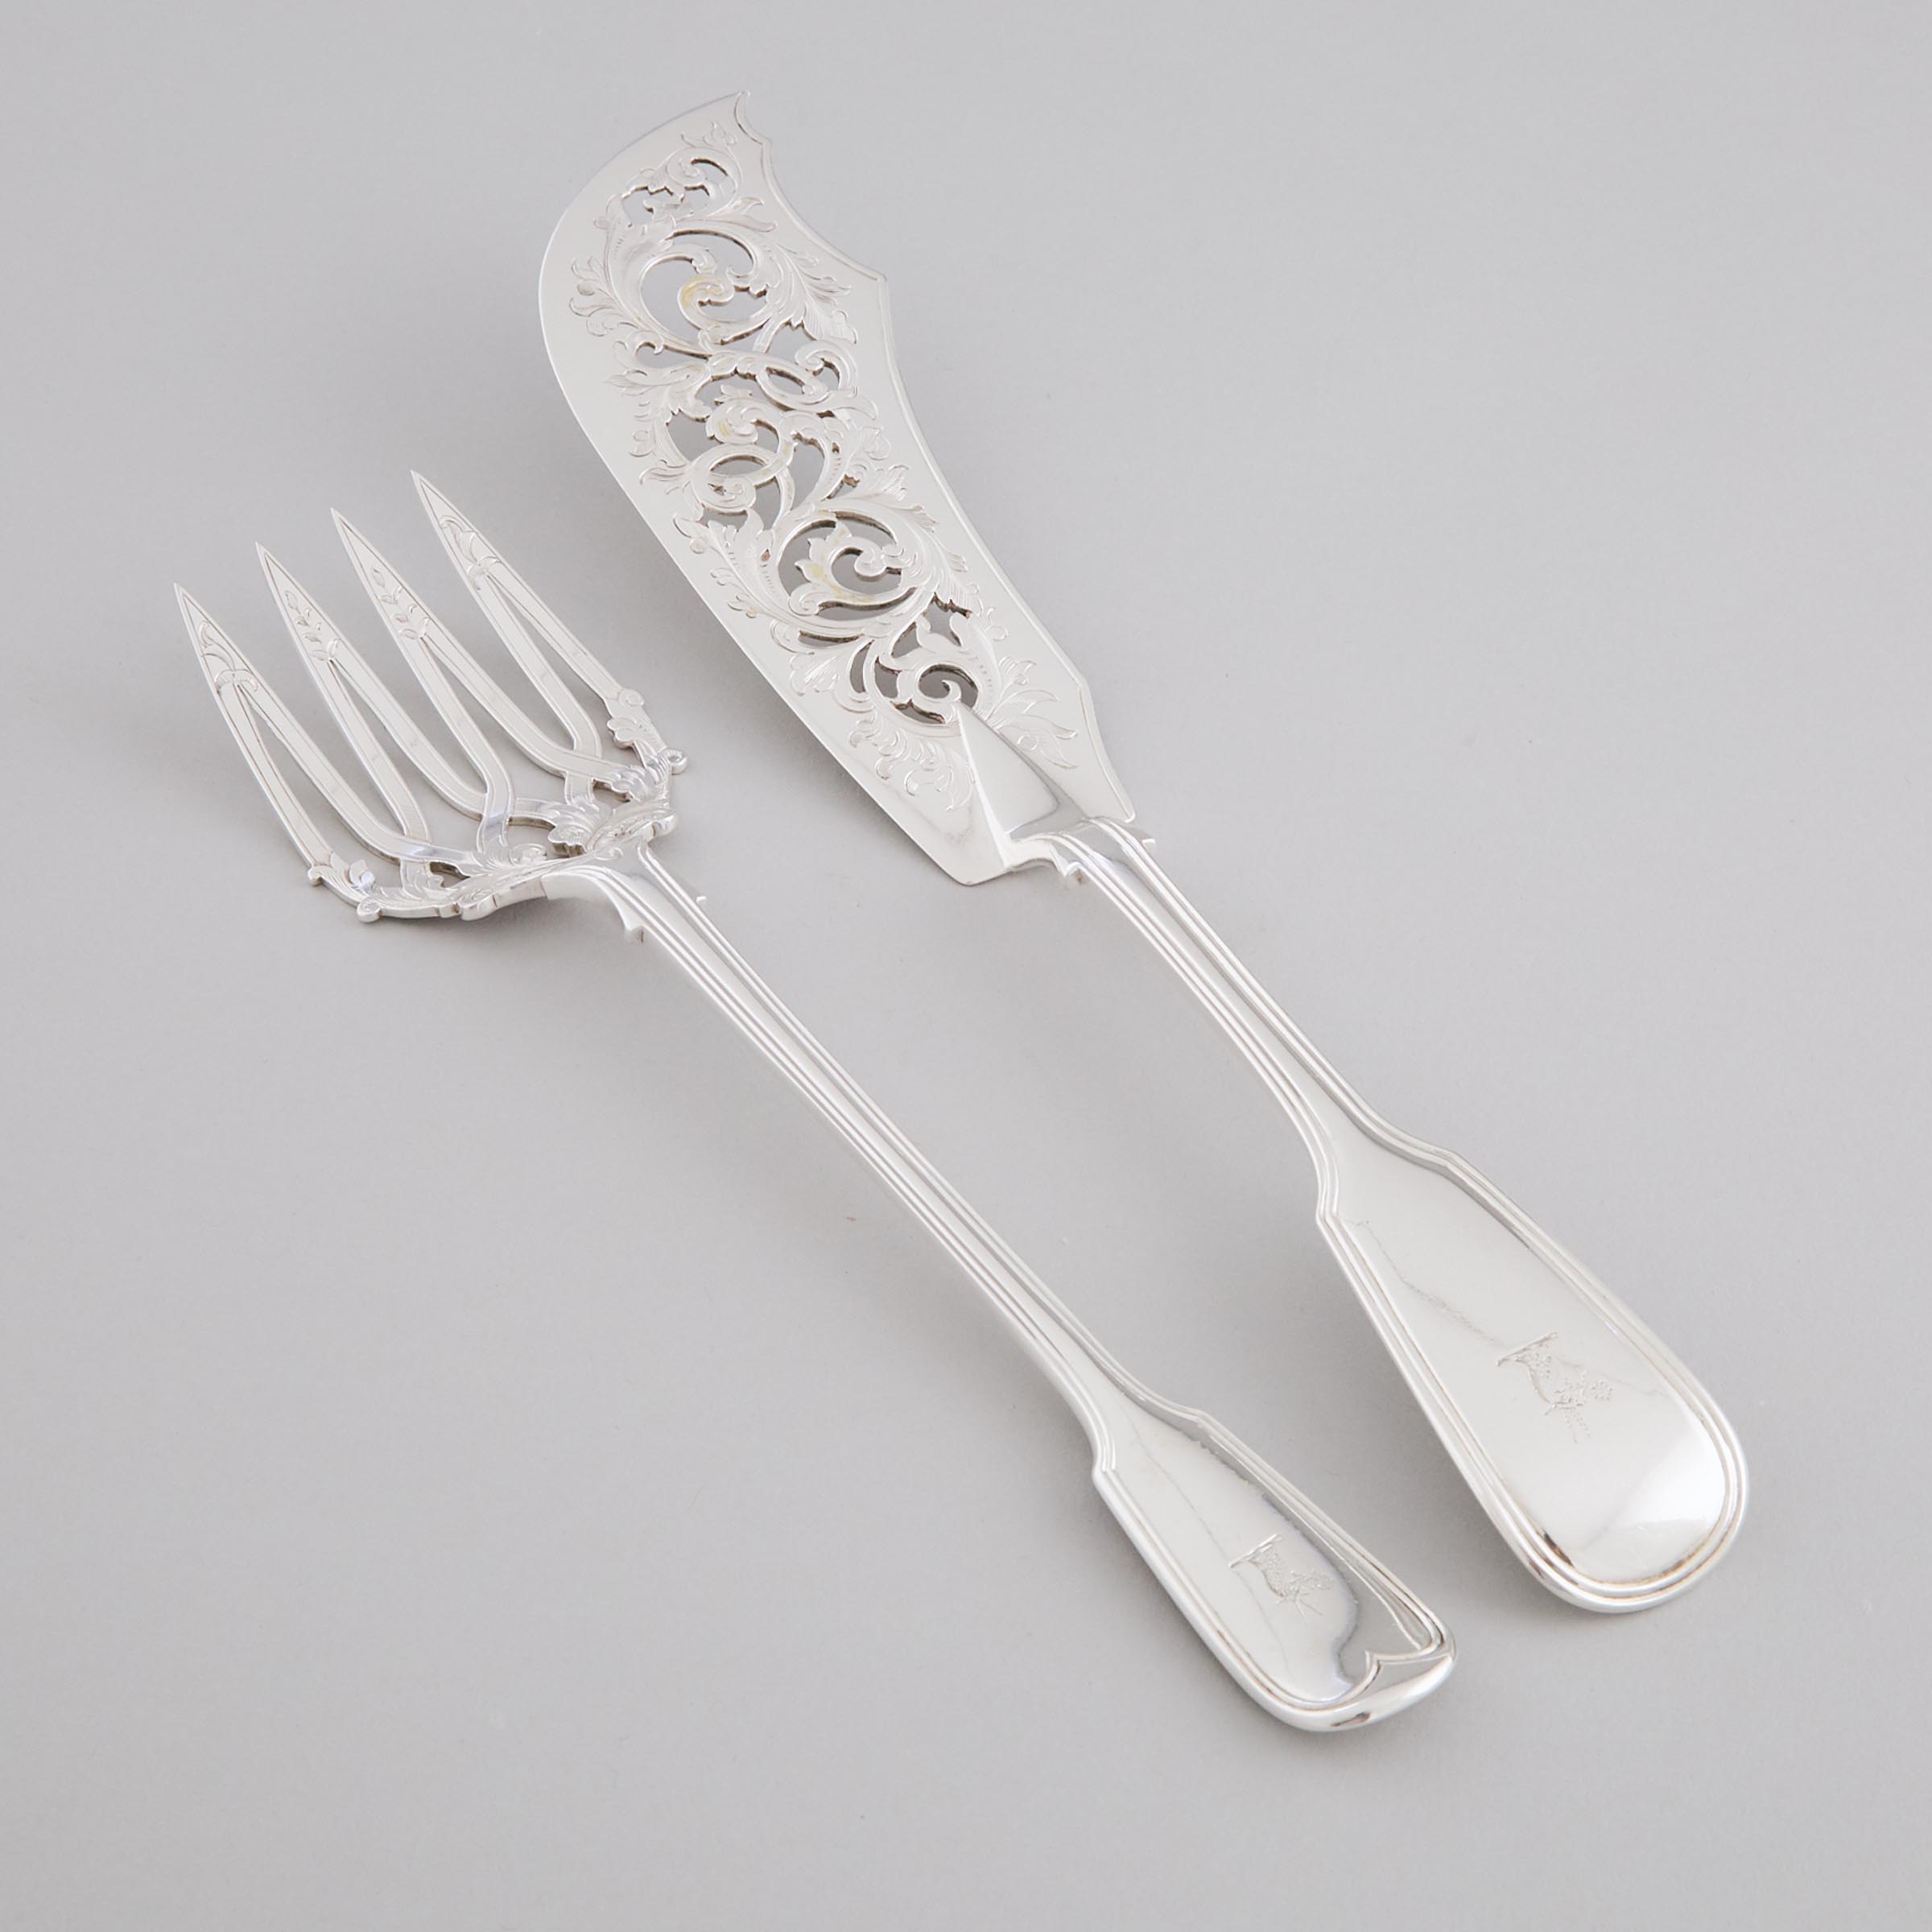 Pair of Victorian Silver Fiddle and Thread Pattern Fish Servers, George Adams, London, 1849/50